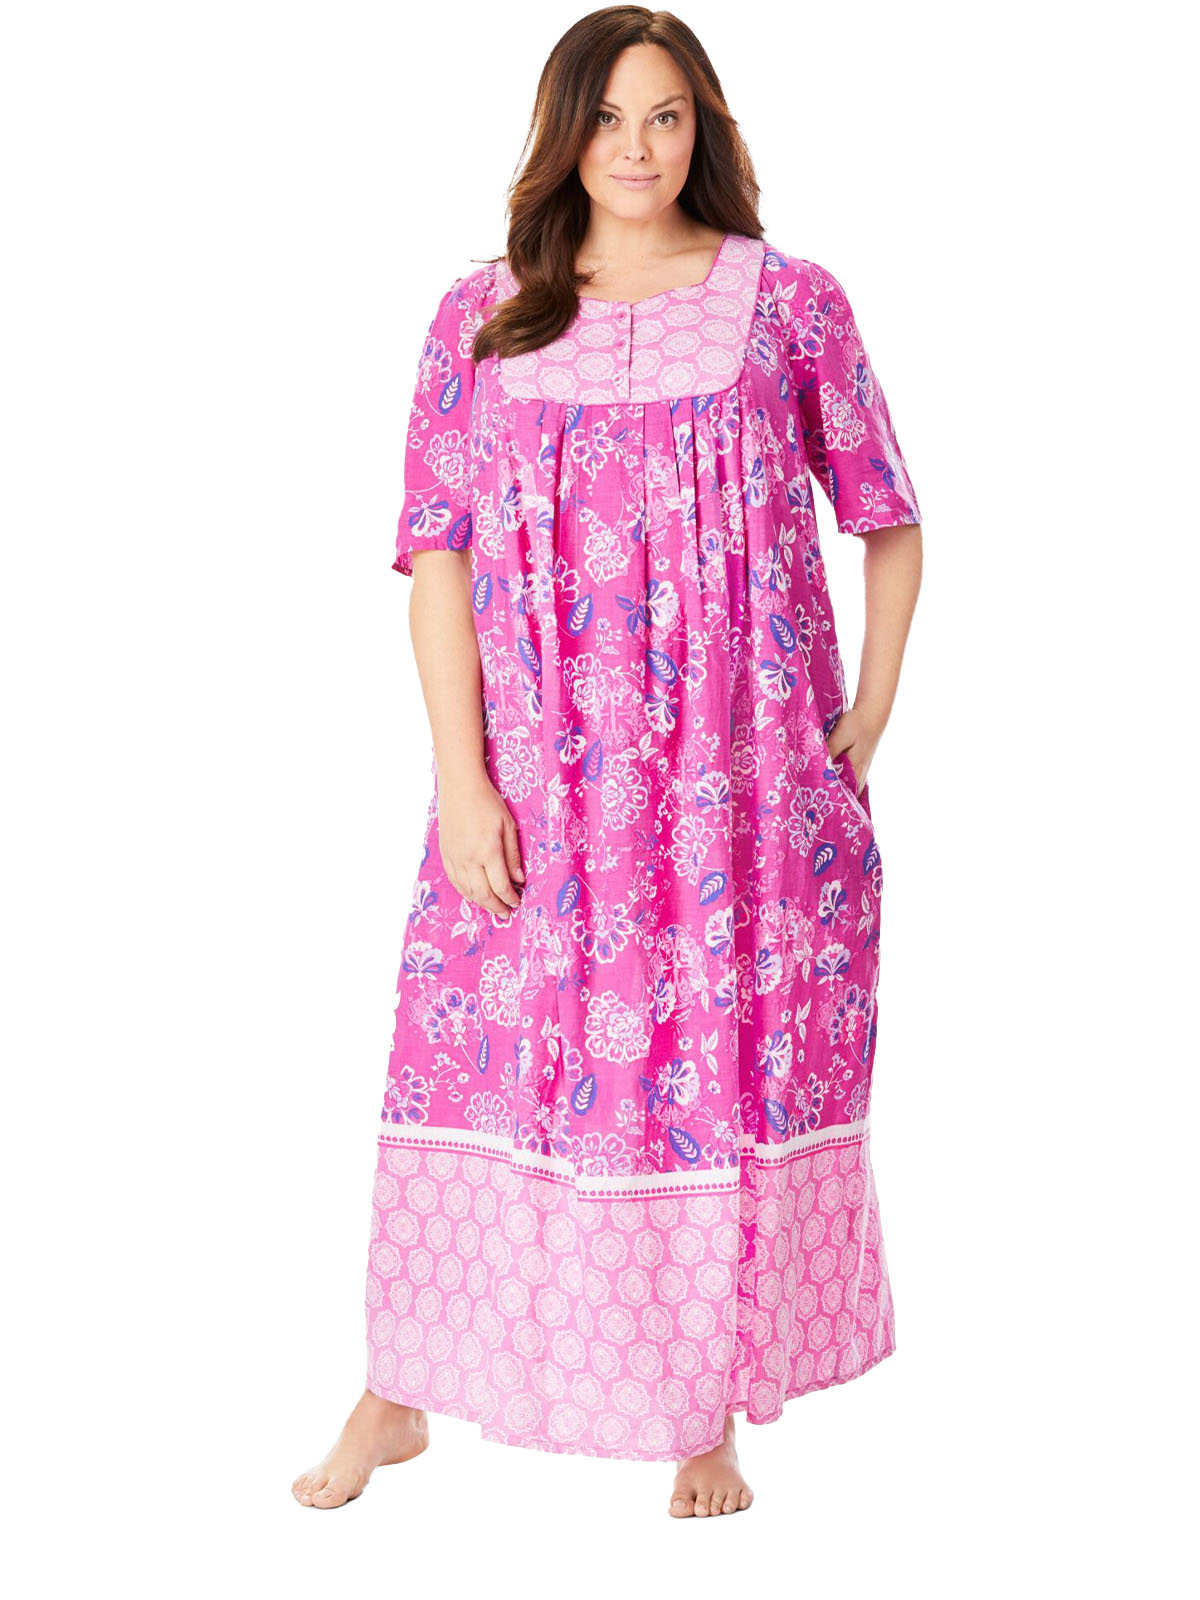 Only Necessities - - PINK Border Print Long Pocket Lounge Dress - Plus ...